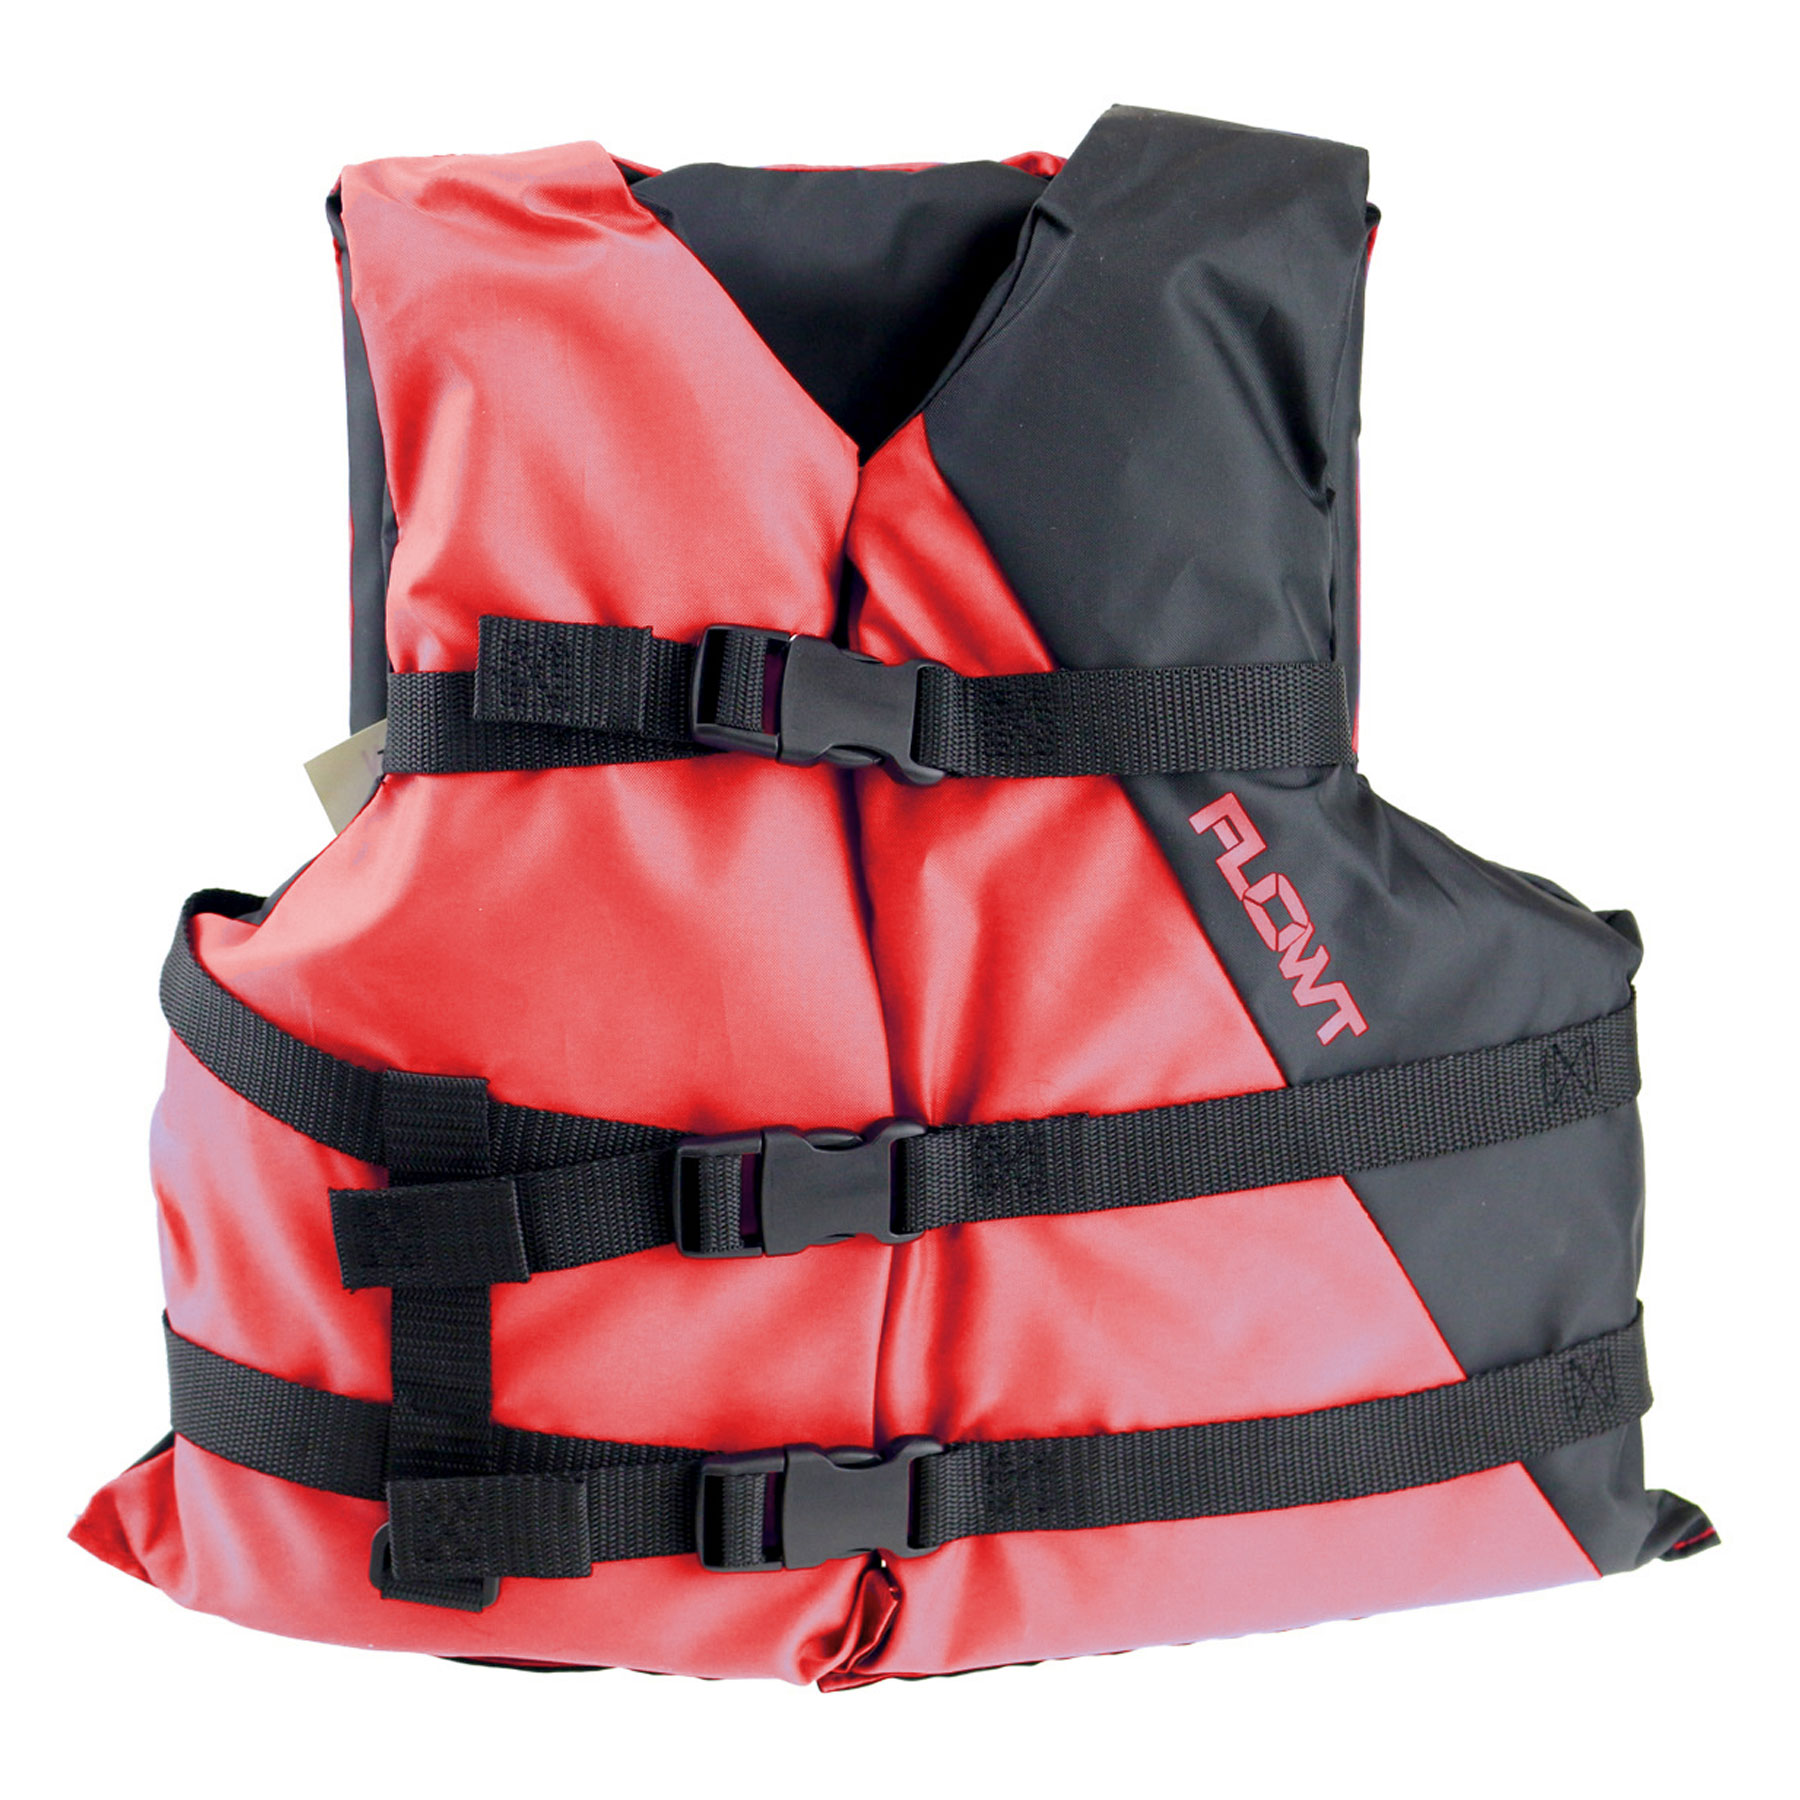 BOATING VEST YOUTH 50-90 LBS